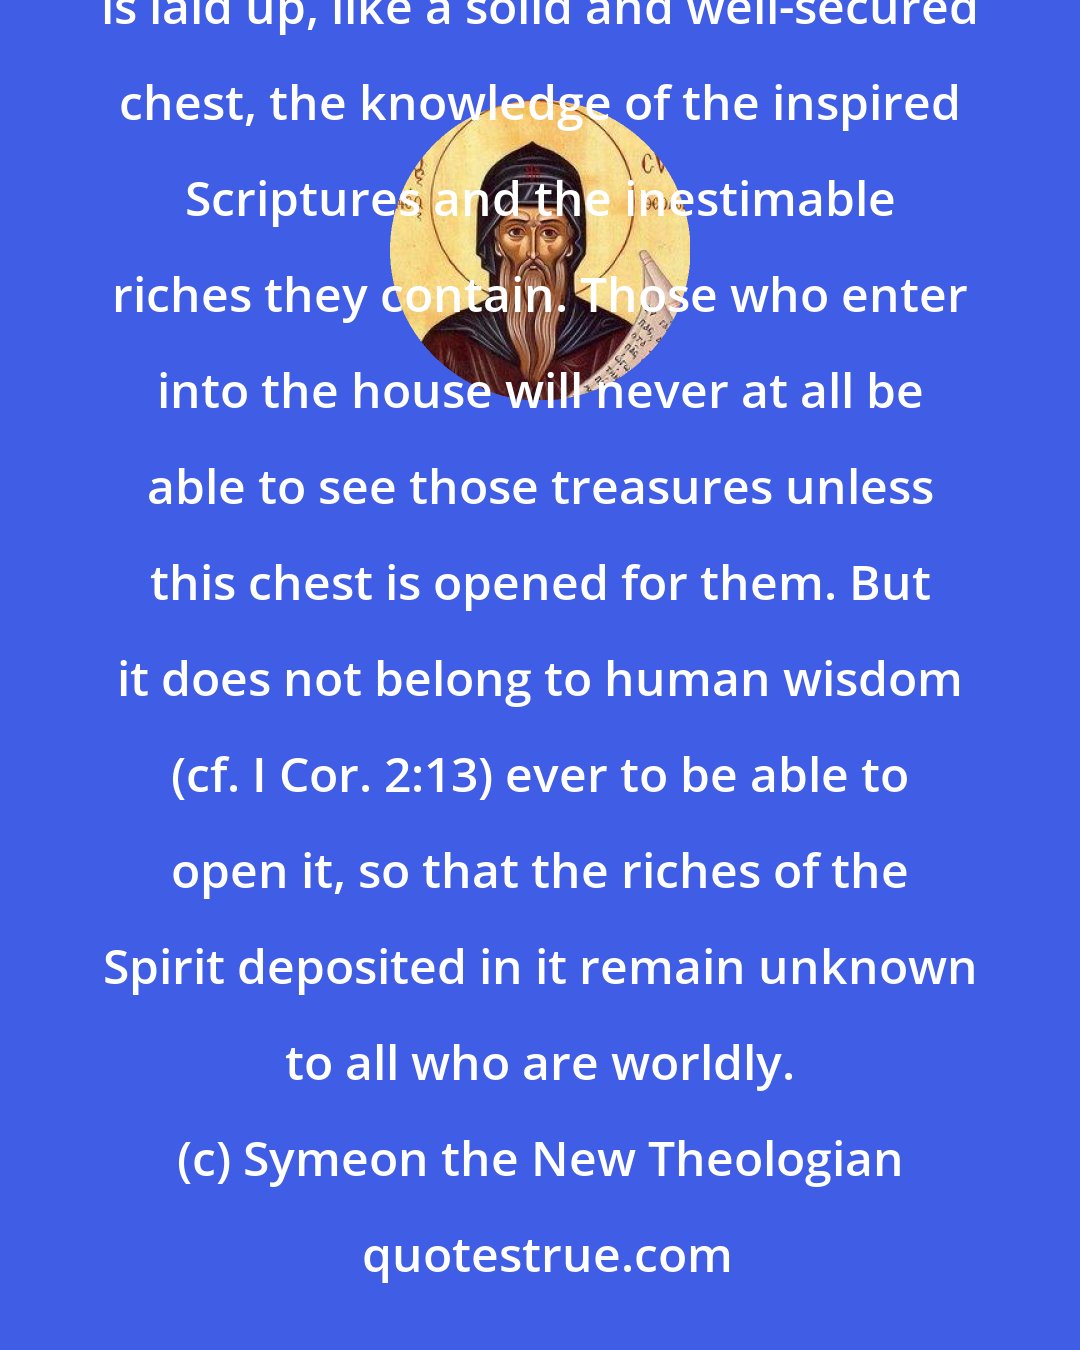 Symeon the New Theologian: Spiritual knowledge is like a house built in the midst of secular and pagan knowledge, in which there is laid up, like a solid and well-secured chest, the knowledge of the inspired Scriptures and the inestimable riches they contain. Those who enter into the house will never at all be able to see those treasures unless this chest is opened for them. But it does not belong to human wisdom (cf. I Cor. 2:13) ever to be able to open it, so that the riches of the Spirit deposited in it remain unknown to all who are worldly.